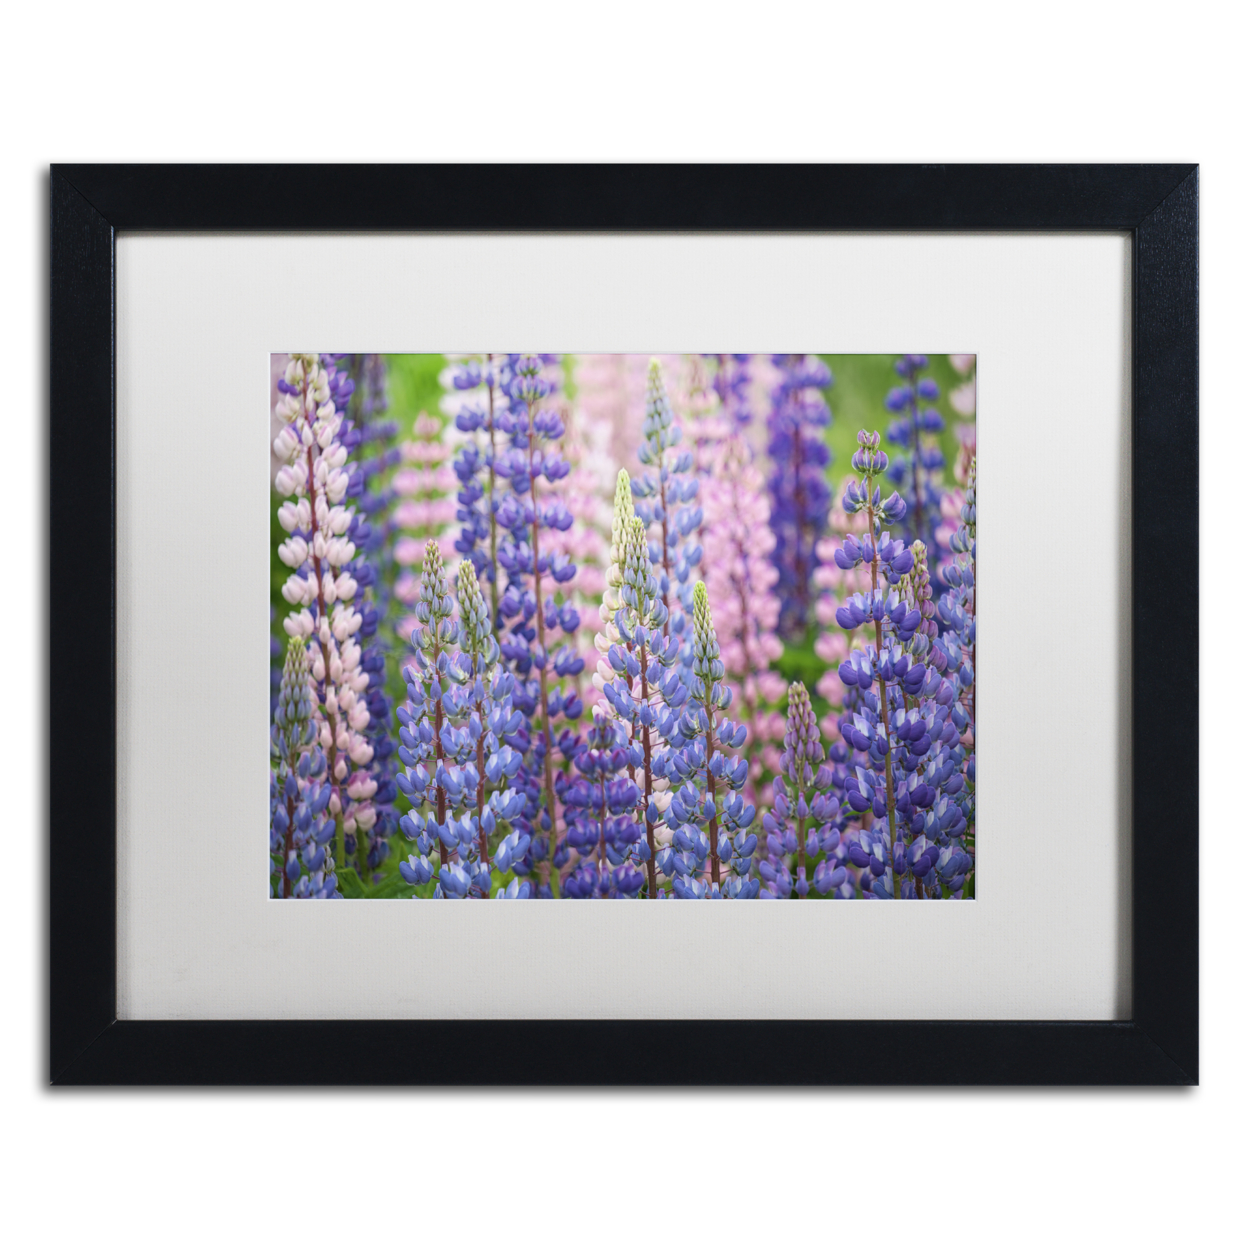 Cora Niele 'Blue Pink Lupine Flowers' Black Wooden Framed Art 18 X 22 Inches